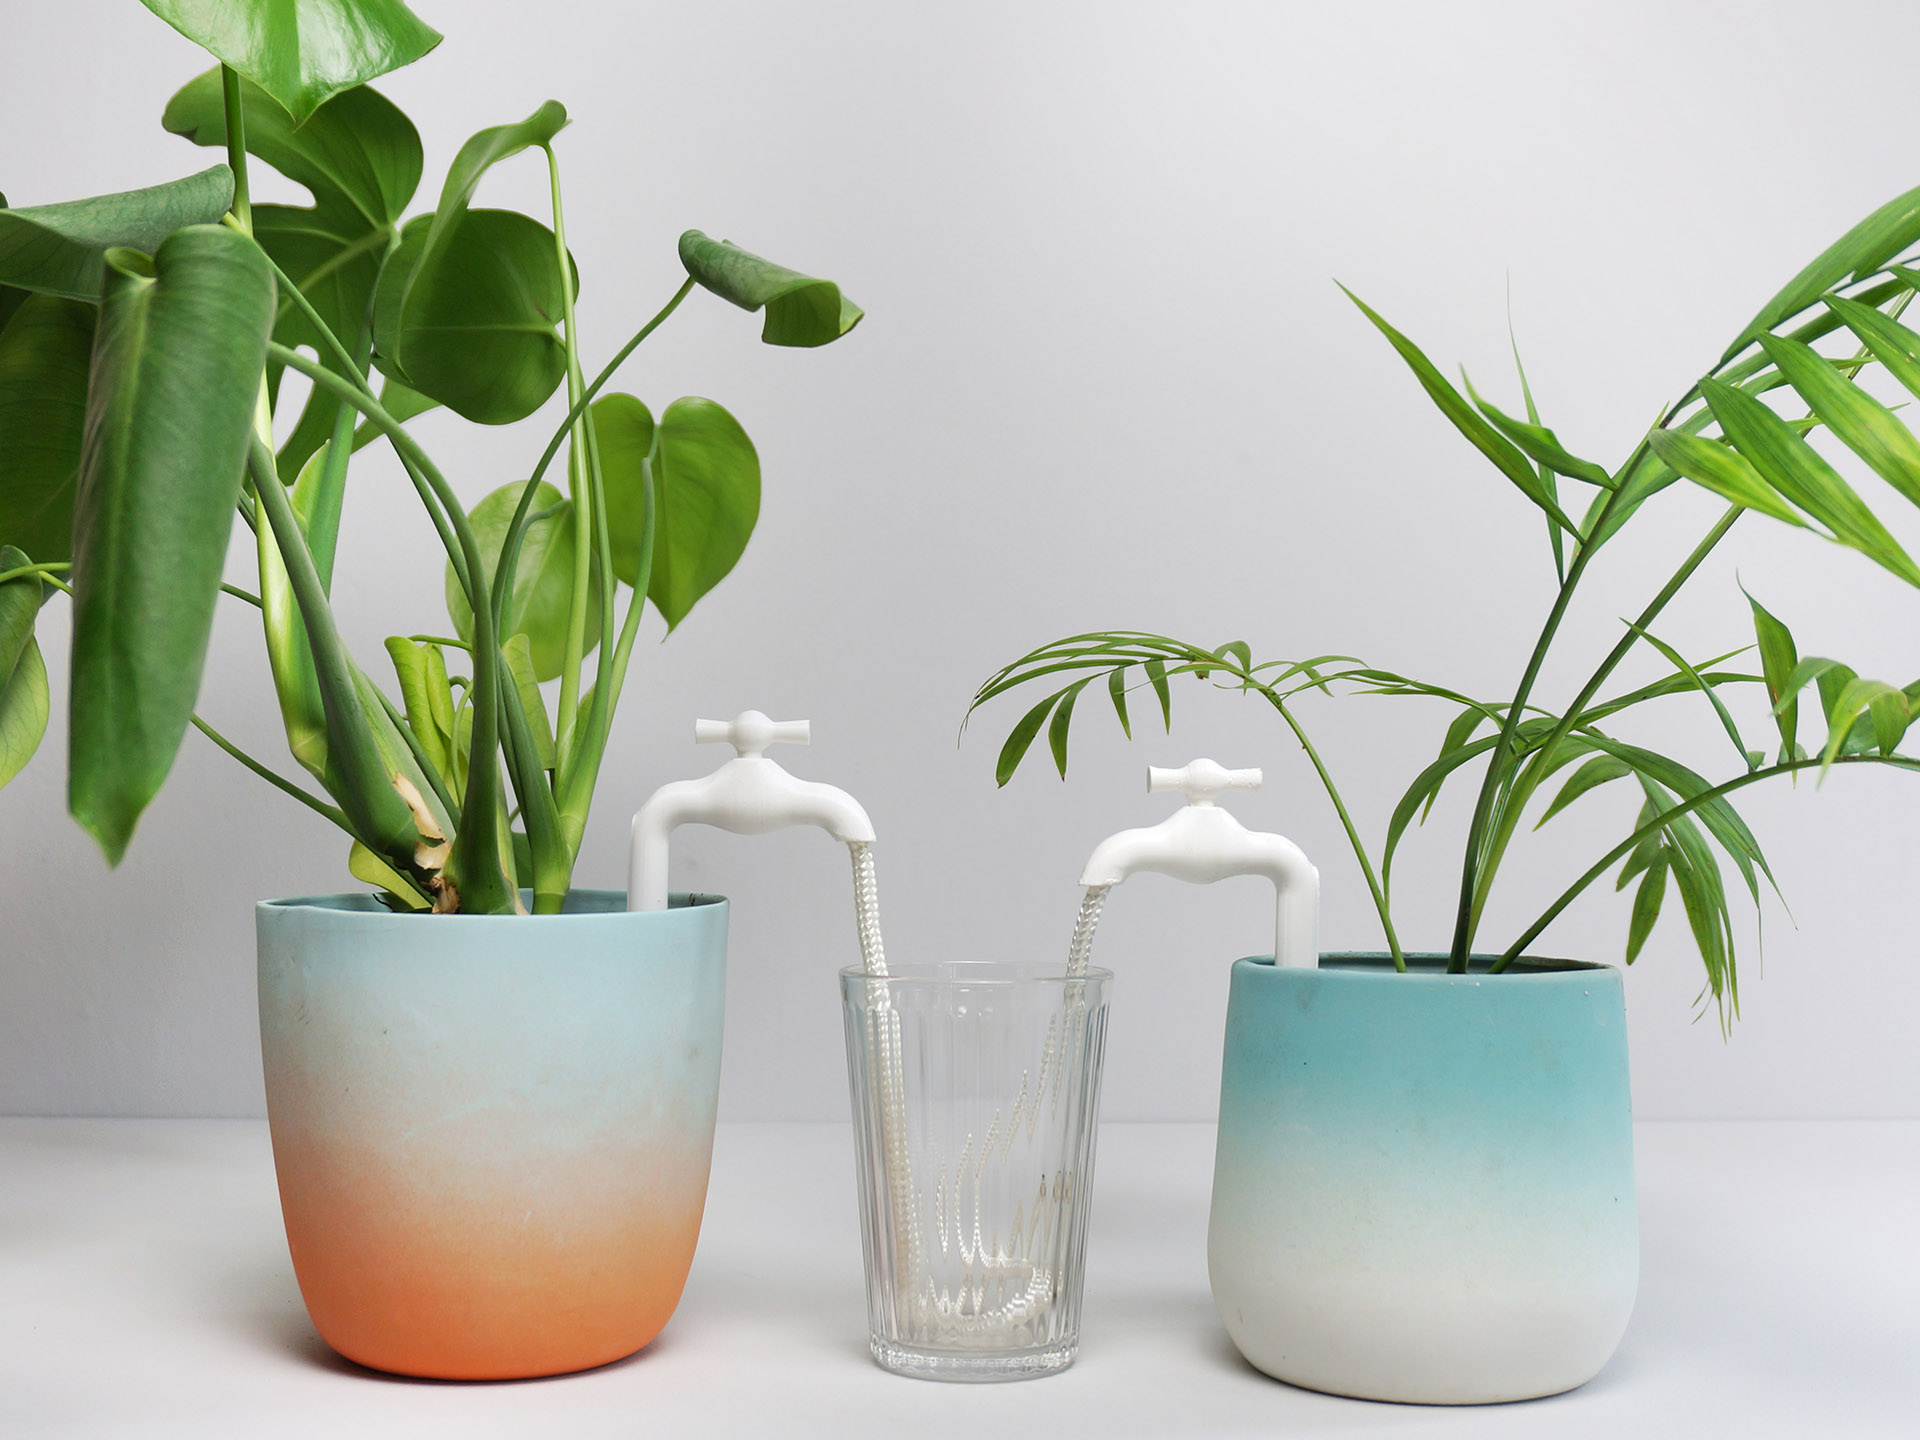 Iconic design of a simple but functional watering system for pot plants: the TapWire